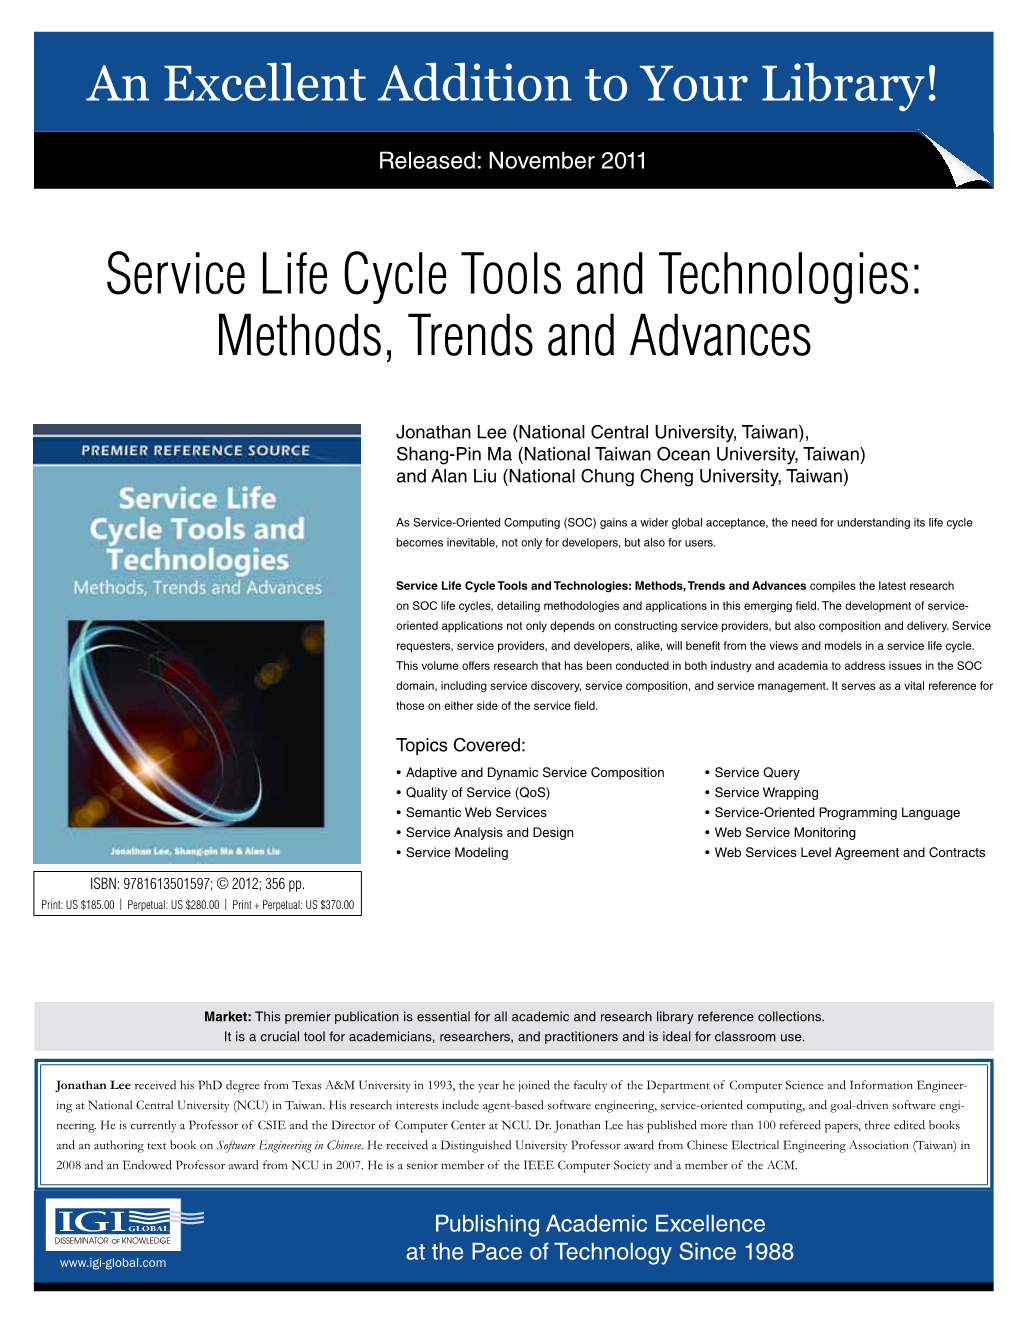 Methods, Trends and Advances